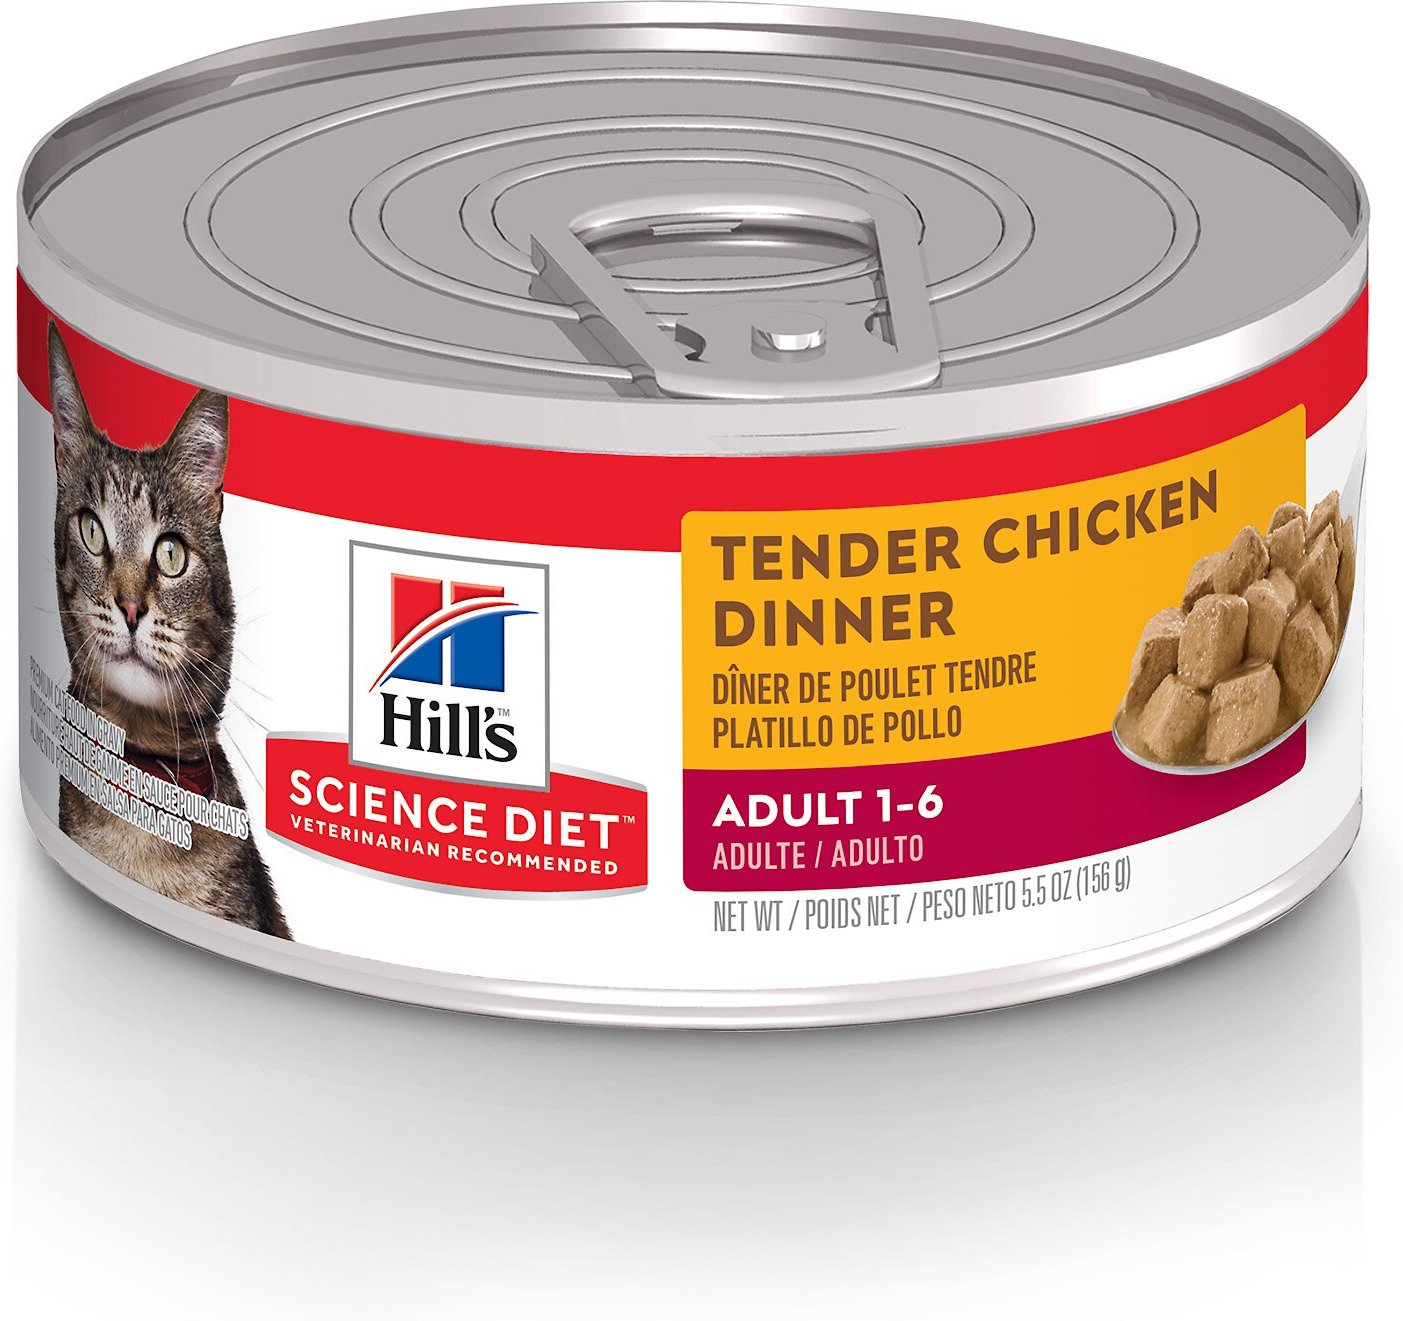 hill's science diet canned cat food